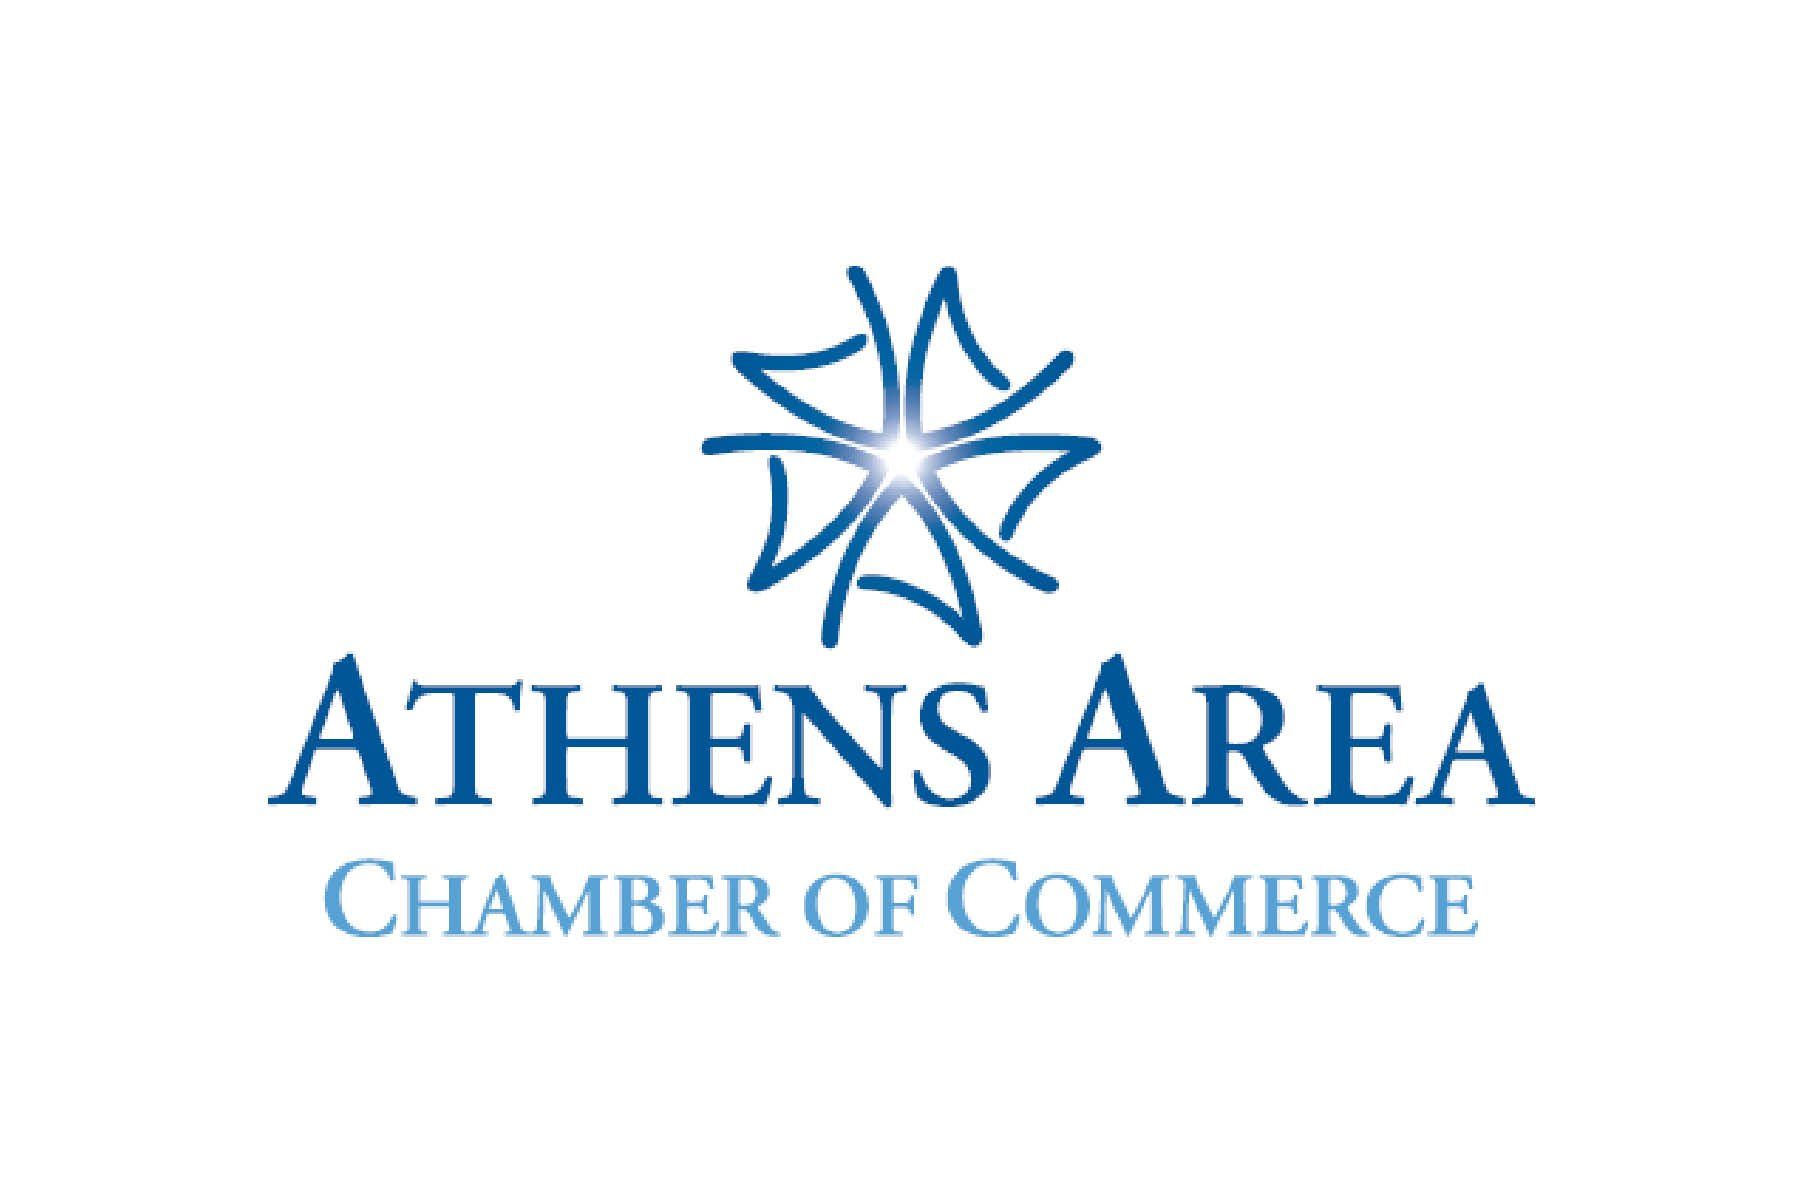 ATHENS AREA CHAMBER OF COMMERCE LOGO